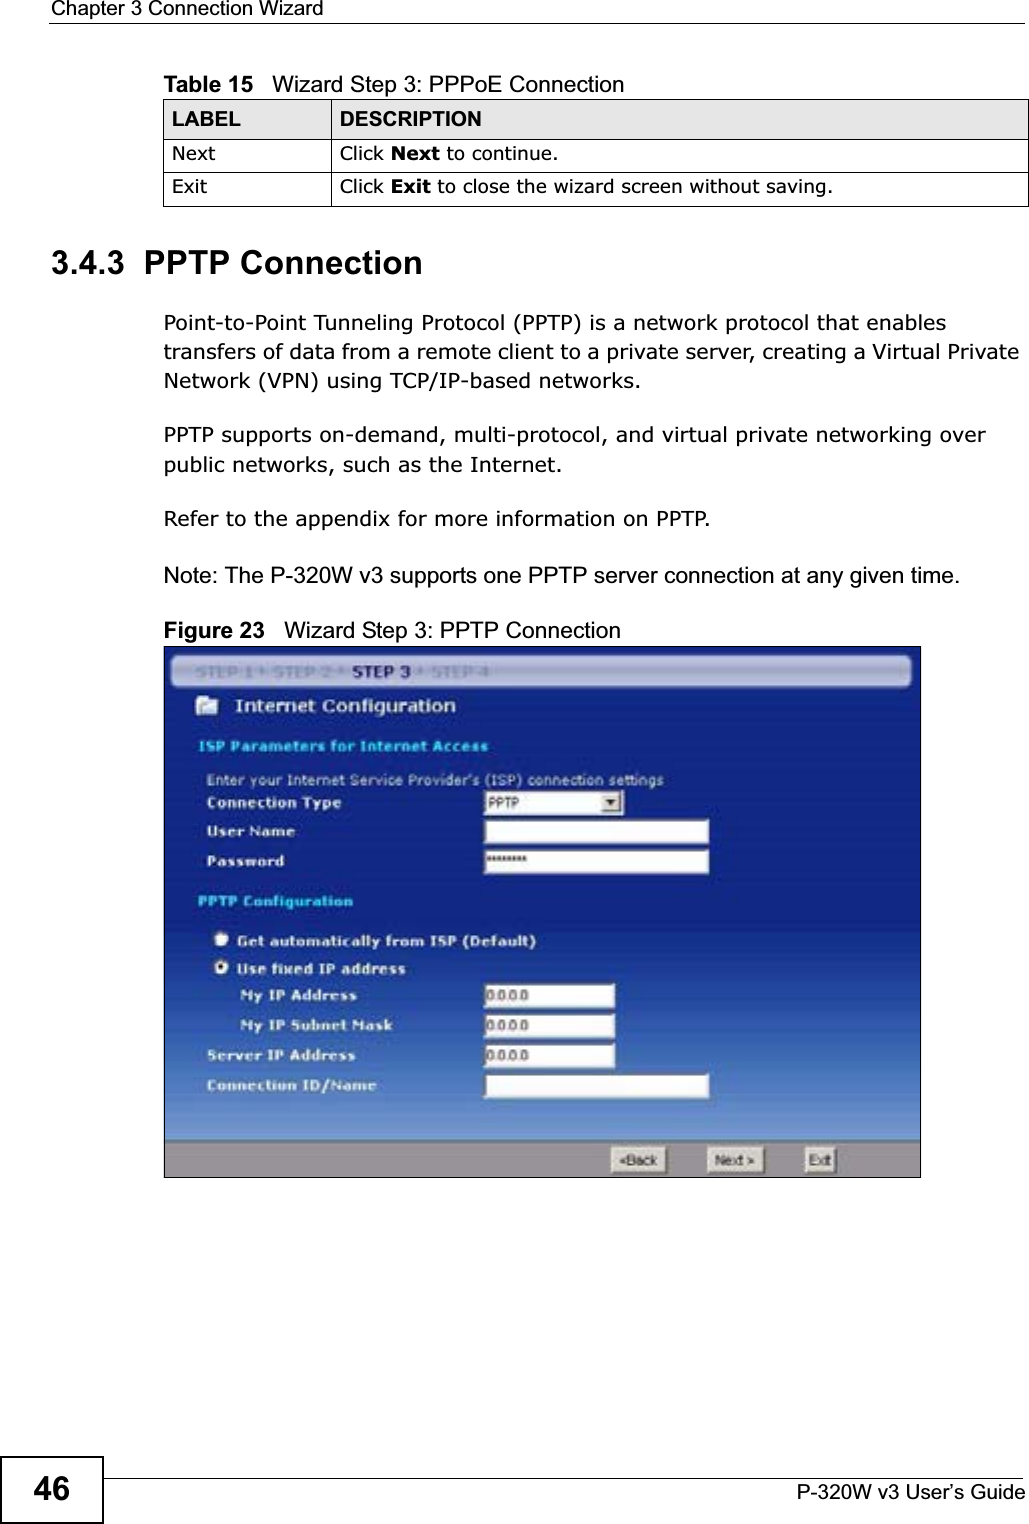 Chapter 3 Connection WizardP-320W v3 User’s Guide463.4.3  PPTP ConnectionPoint-to-Point Tunneling Protocol (PPTP) is a network protocol that enables transfers of data from a remote client to a private server, creating a Virtual Private Network (VPN) using TCP/IP-based networks.PPTP supports on-demand, multi-protocol, and virtual private networking over public networks, such as the Internet.Refer to the appendix for more information on PPTP.Note: The P-320W v3 supports one PPTP server connection at any given time.Figure 23   Wizard Step 3: PPTP ConnectionNext Click Next to continue. Exit Click Exit to close the wizard screen without saving.Table 15   Wizard Step 3: PPPoE ConnectionLABEL DESCRIPTION